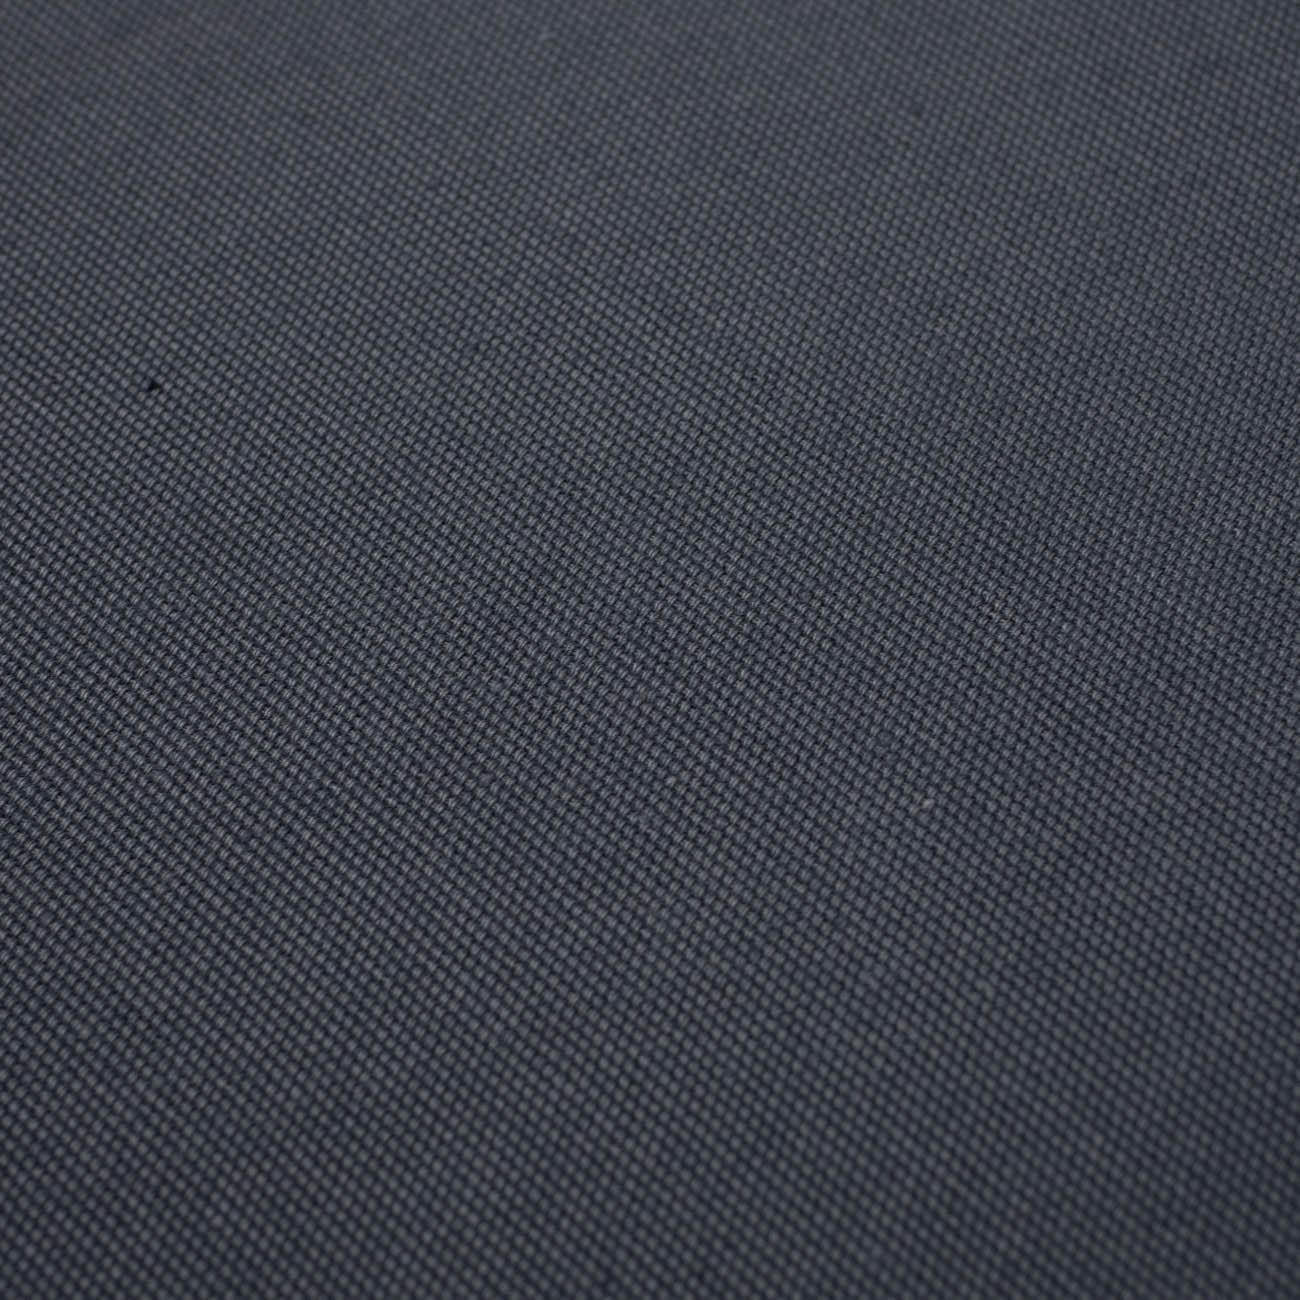 ANTHRACITE - Jeans woven fabric 200g